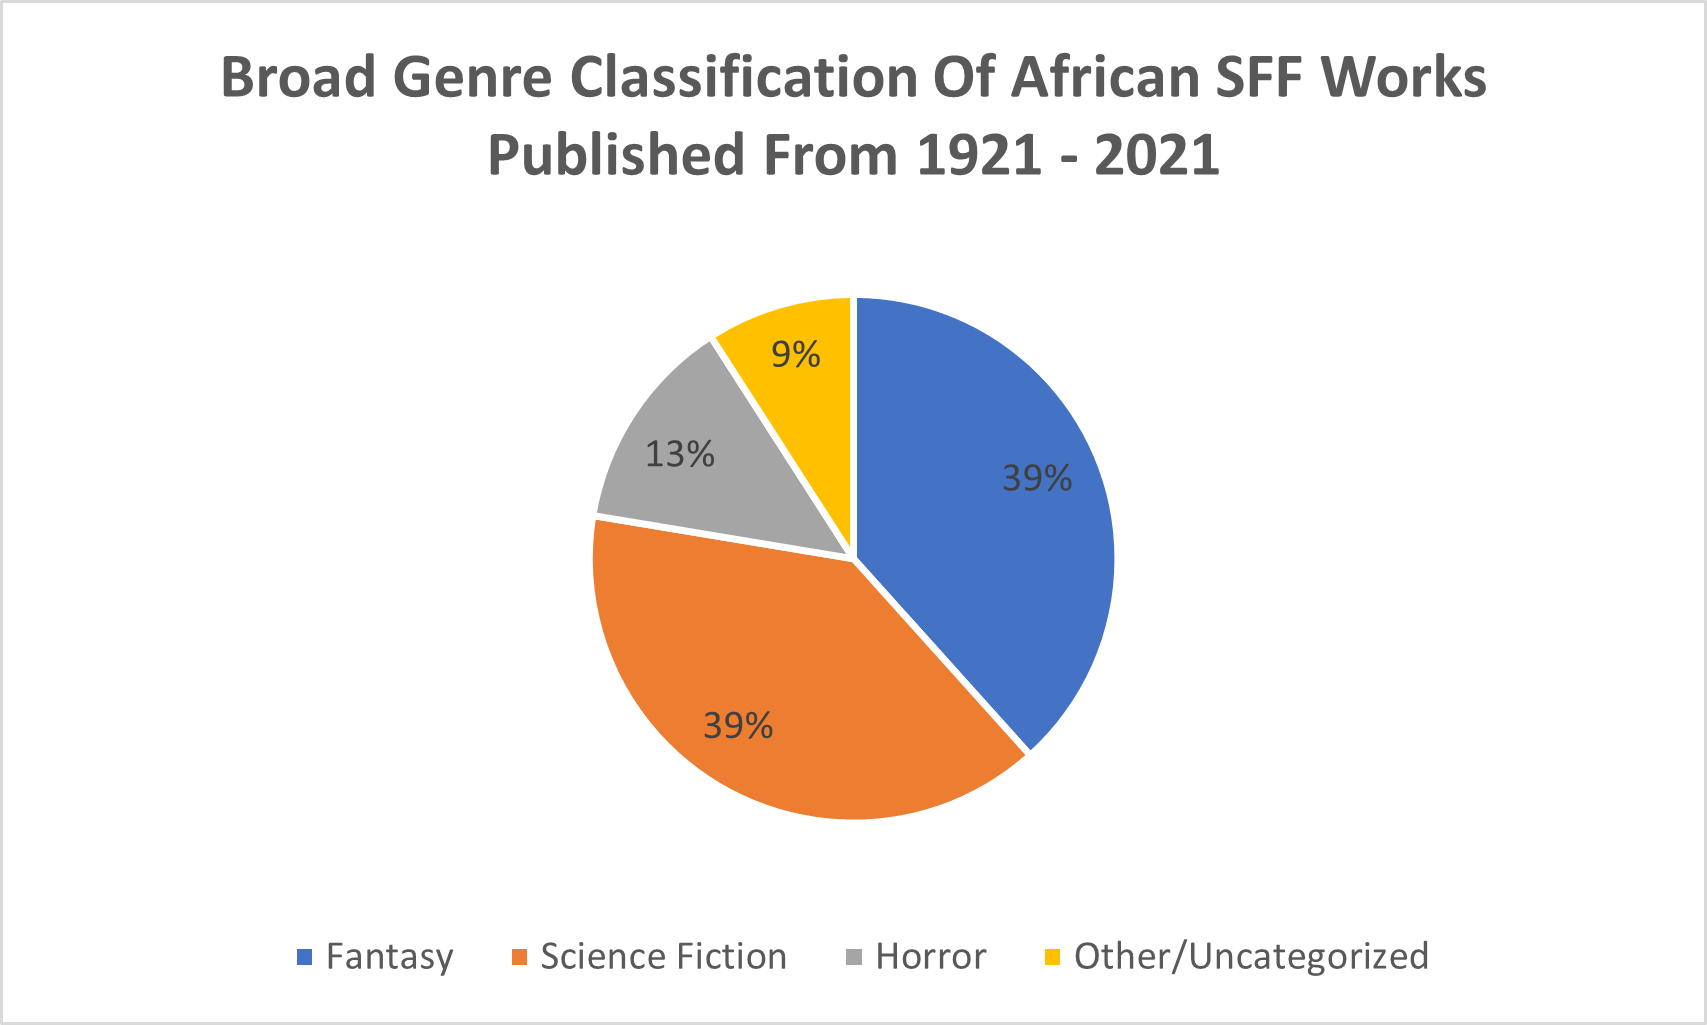 Pie chart of the genre classifications of African SFF works. 39% scifi, 38% fantasy, 13% horror, 9% other/uncategorized